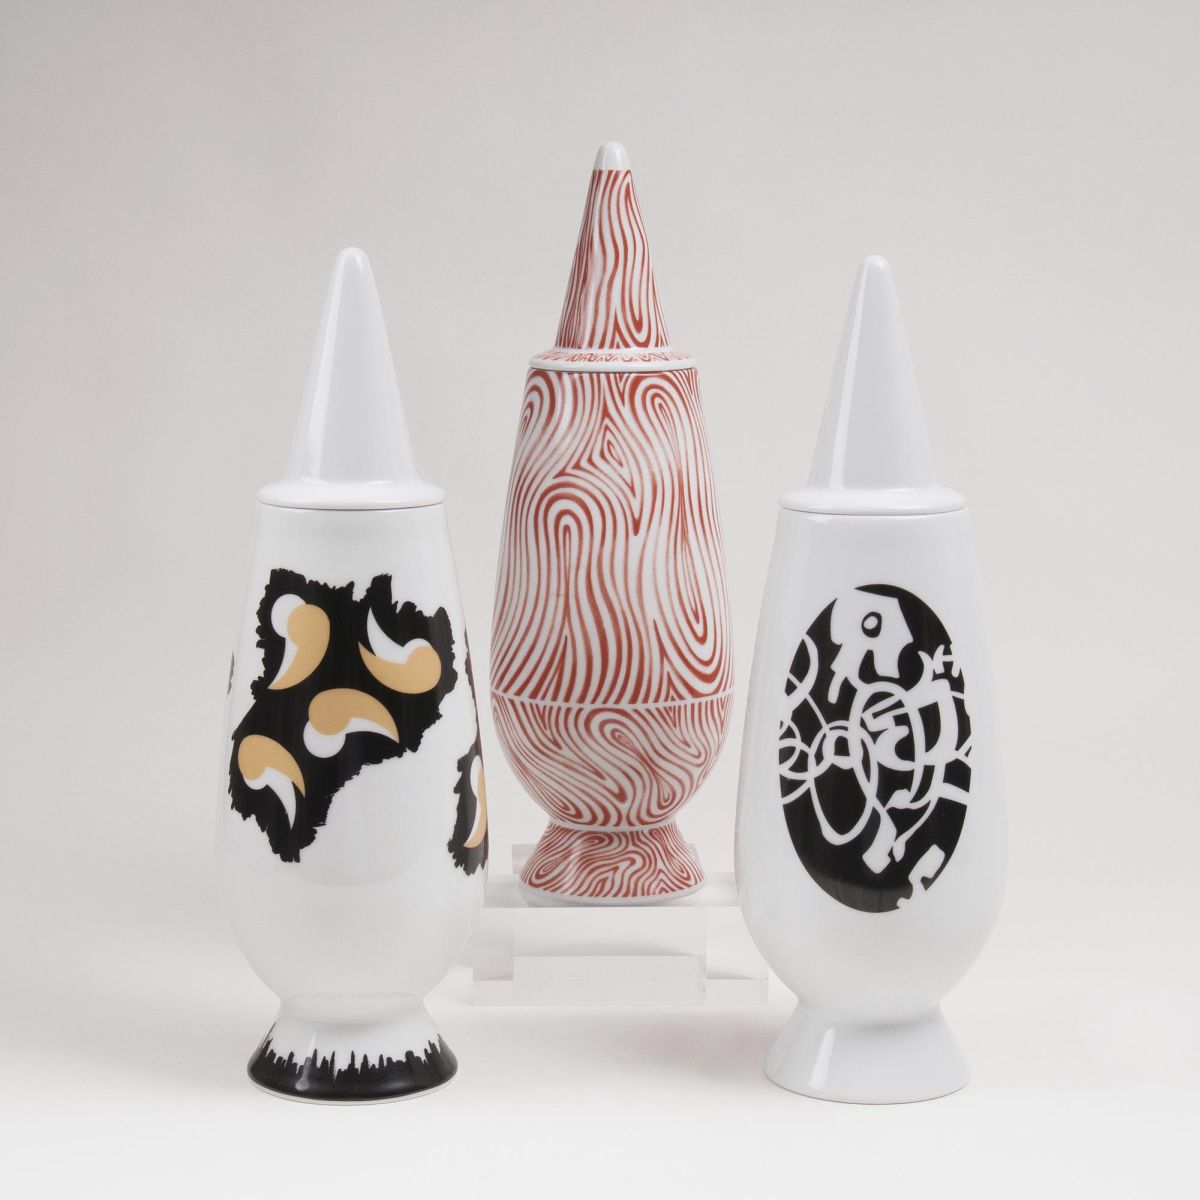 Three Vases from the series 'Tendentse'